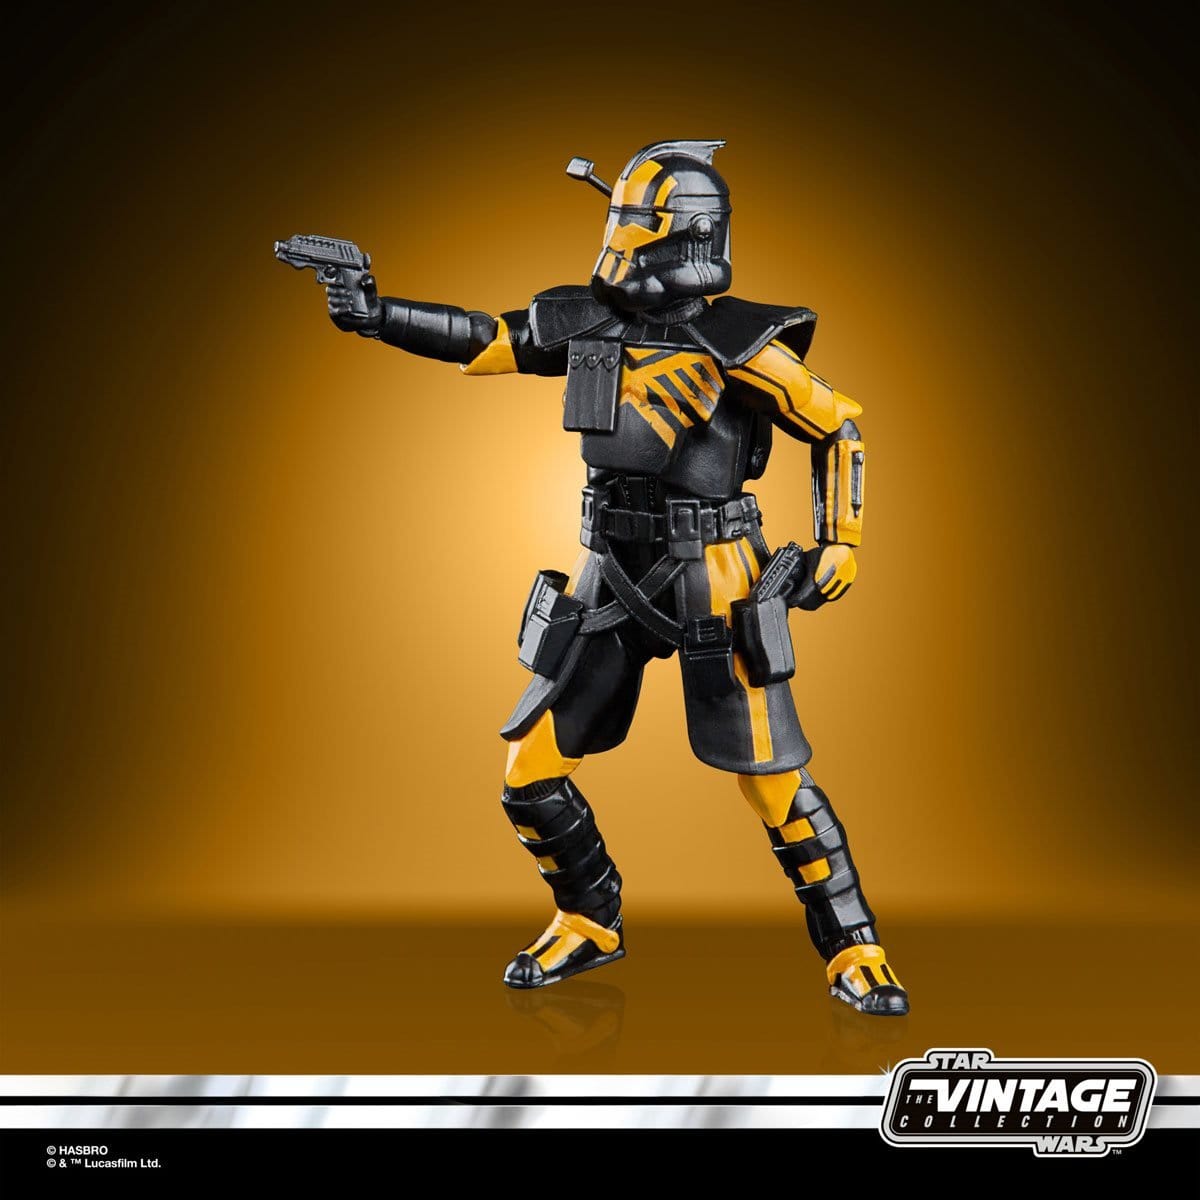 Star Wars The Vintage Collection Umbra Operative ARC Trooper 3 3/4-Inch Action Figure - Entertainment Earth Exclusive